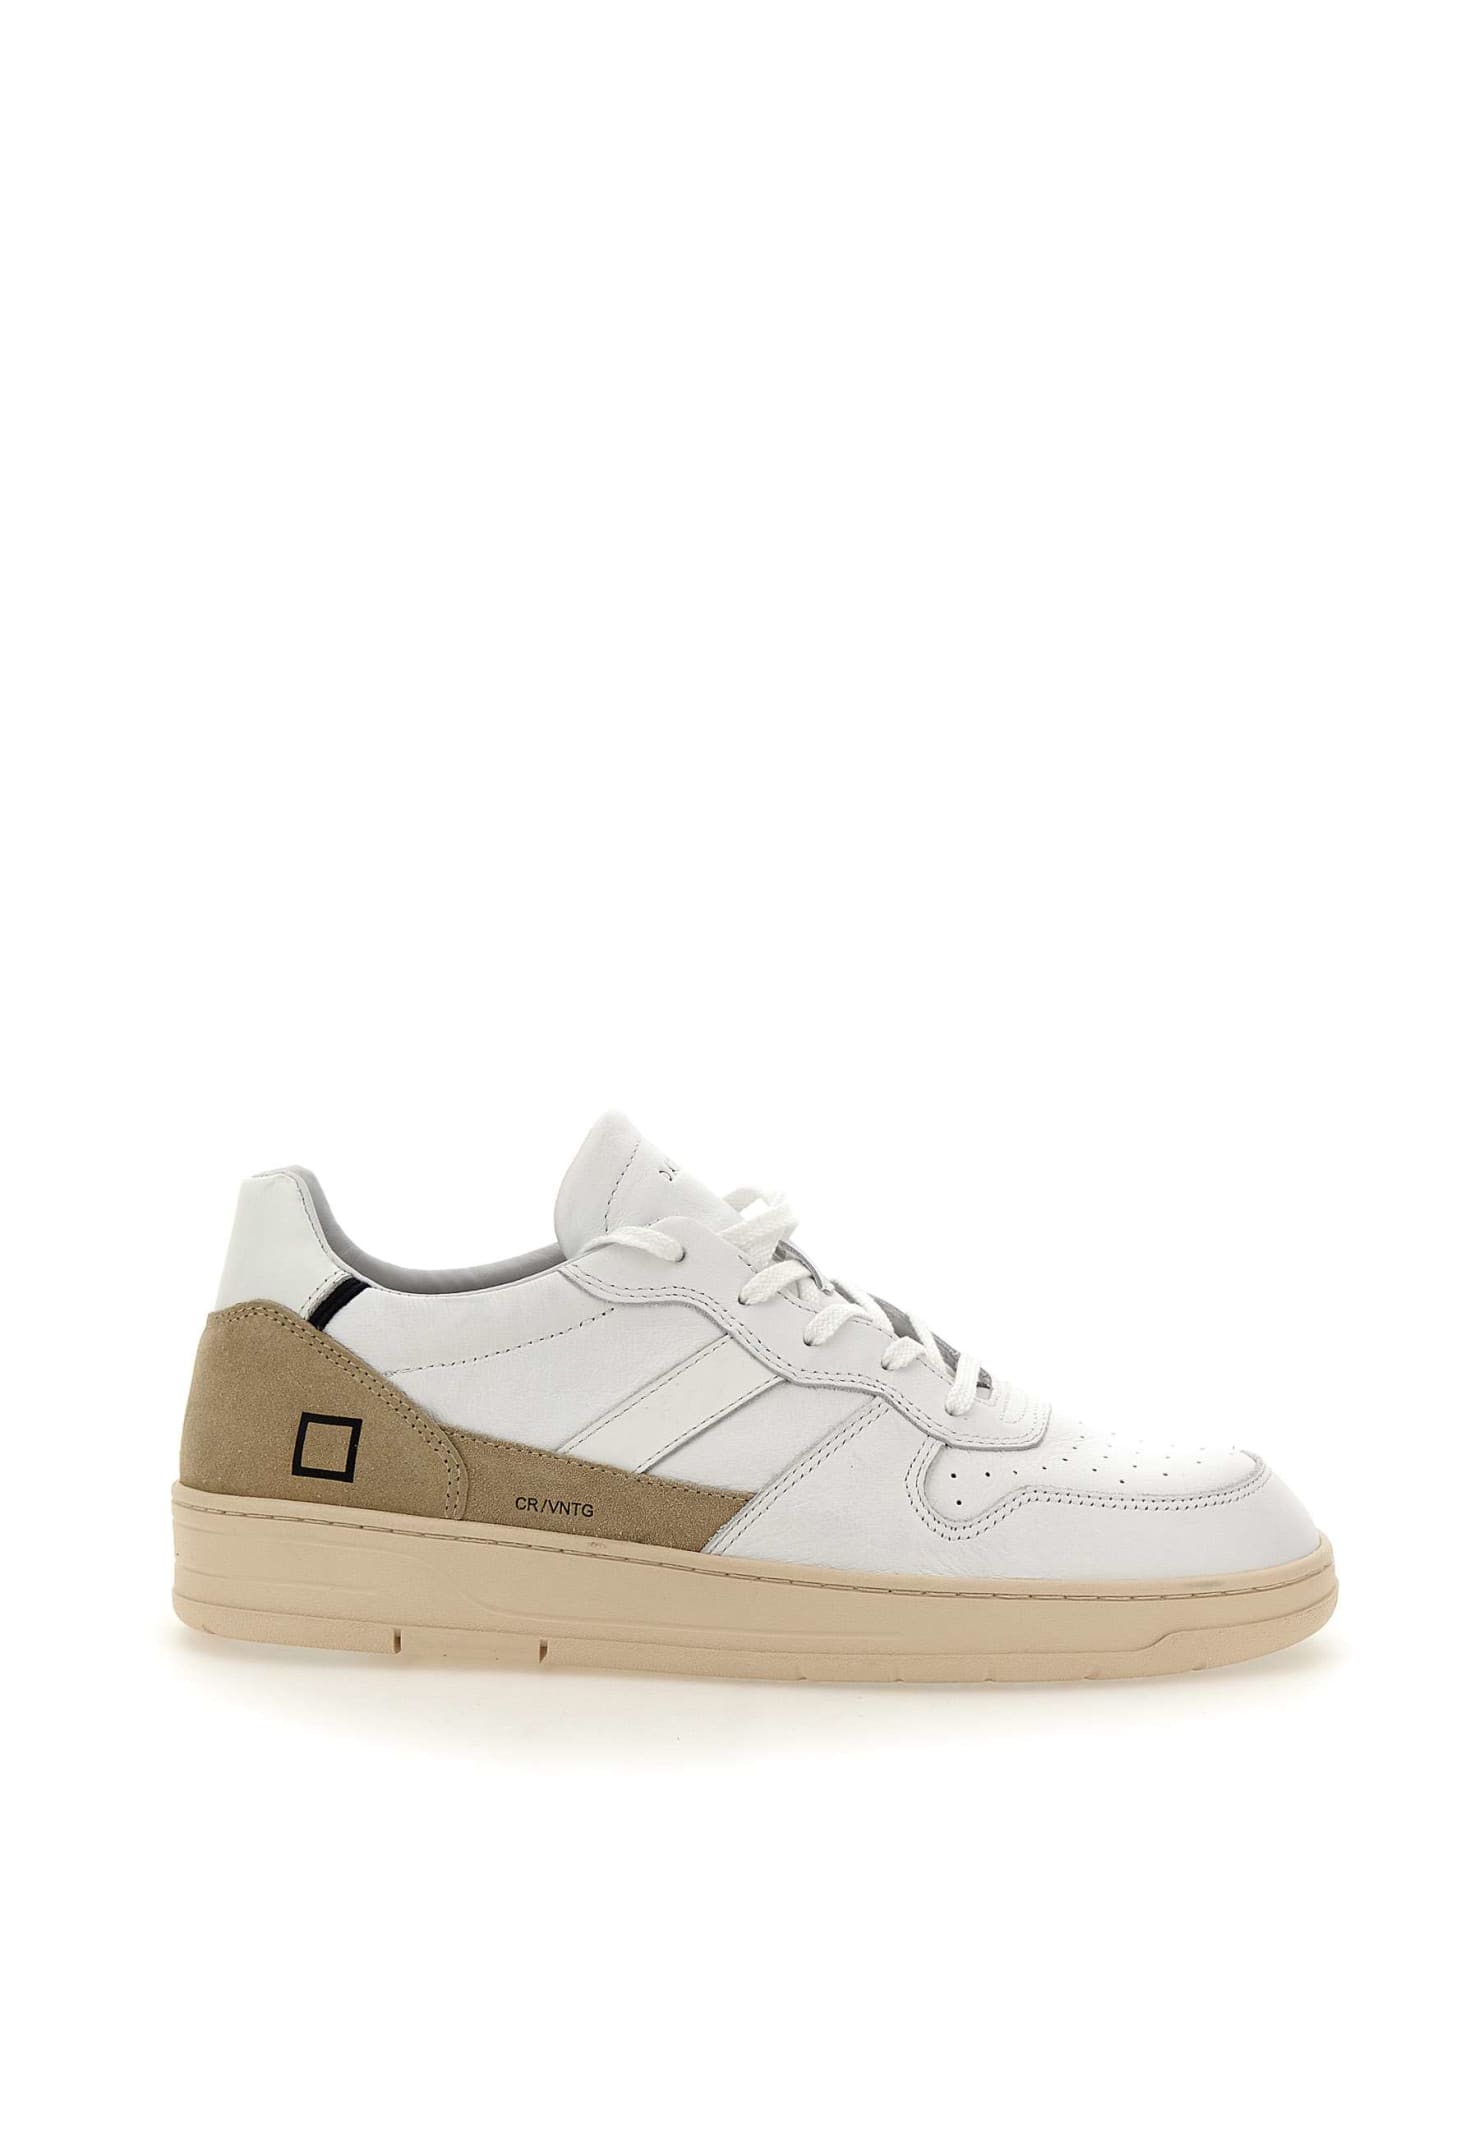 DATE COURT 2.0 VINTAGE LEATHER SNEAKERS